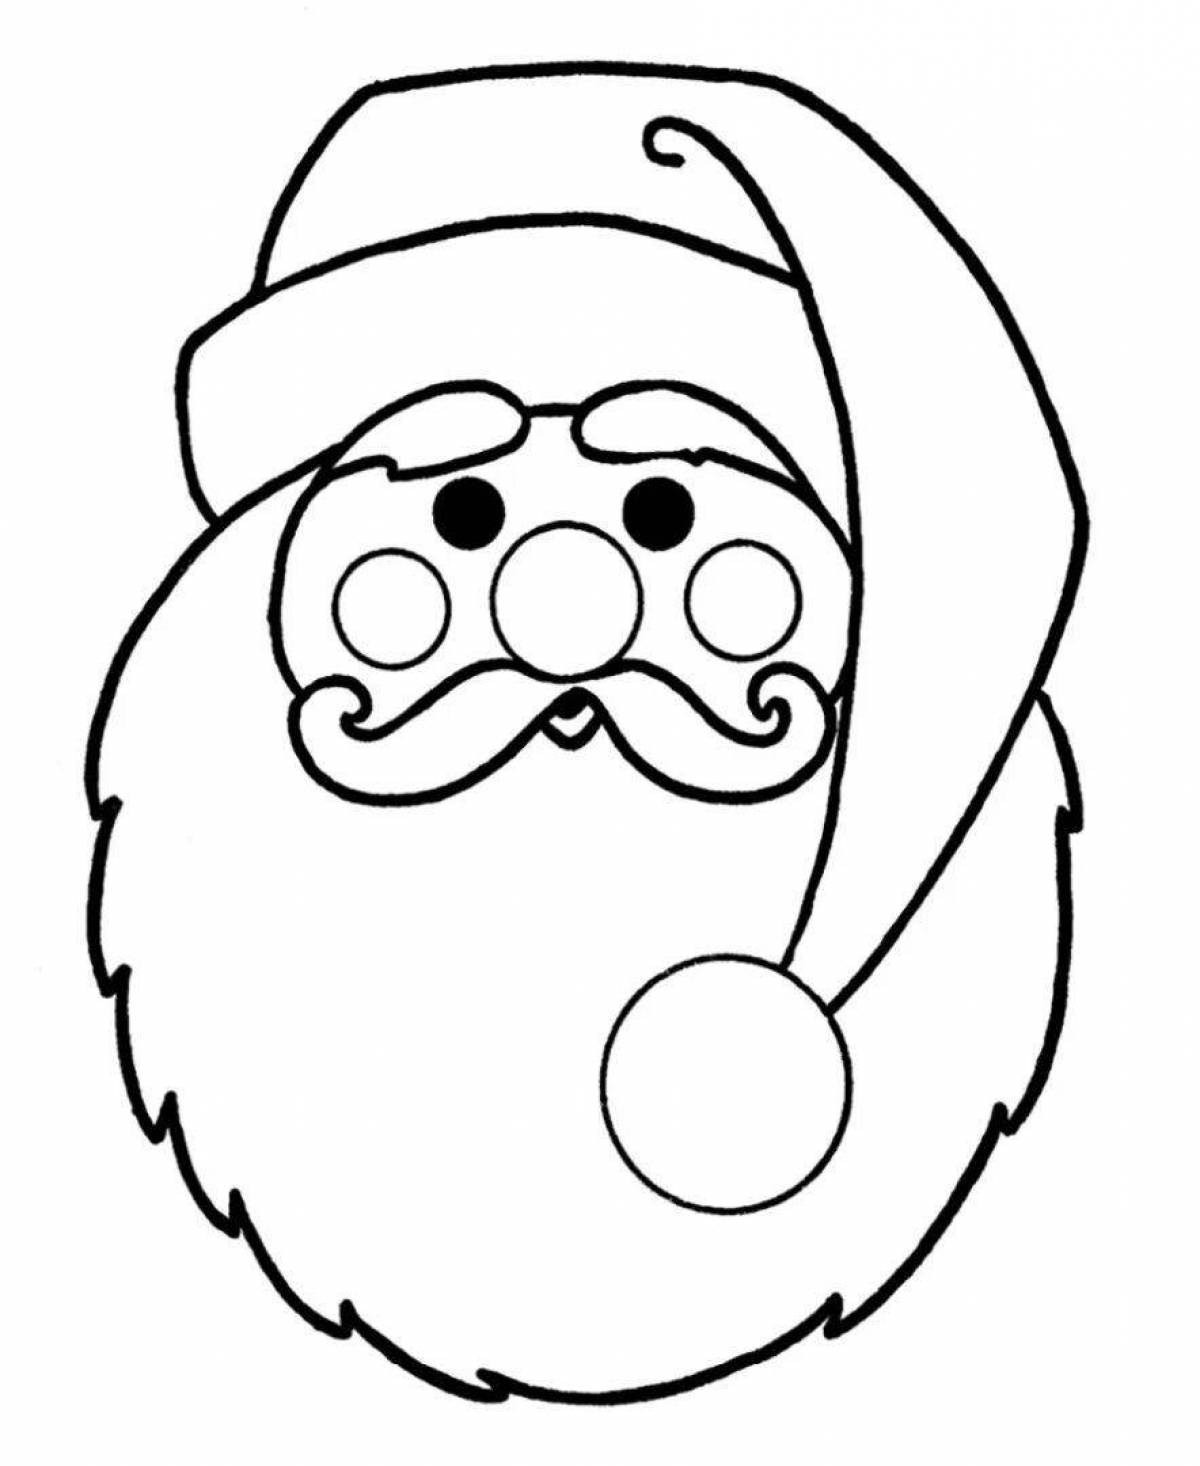 Finished santa claus coloring